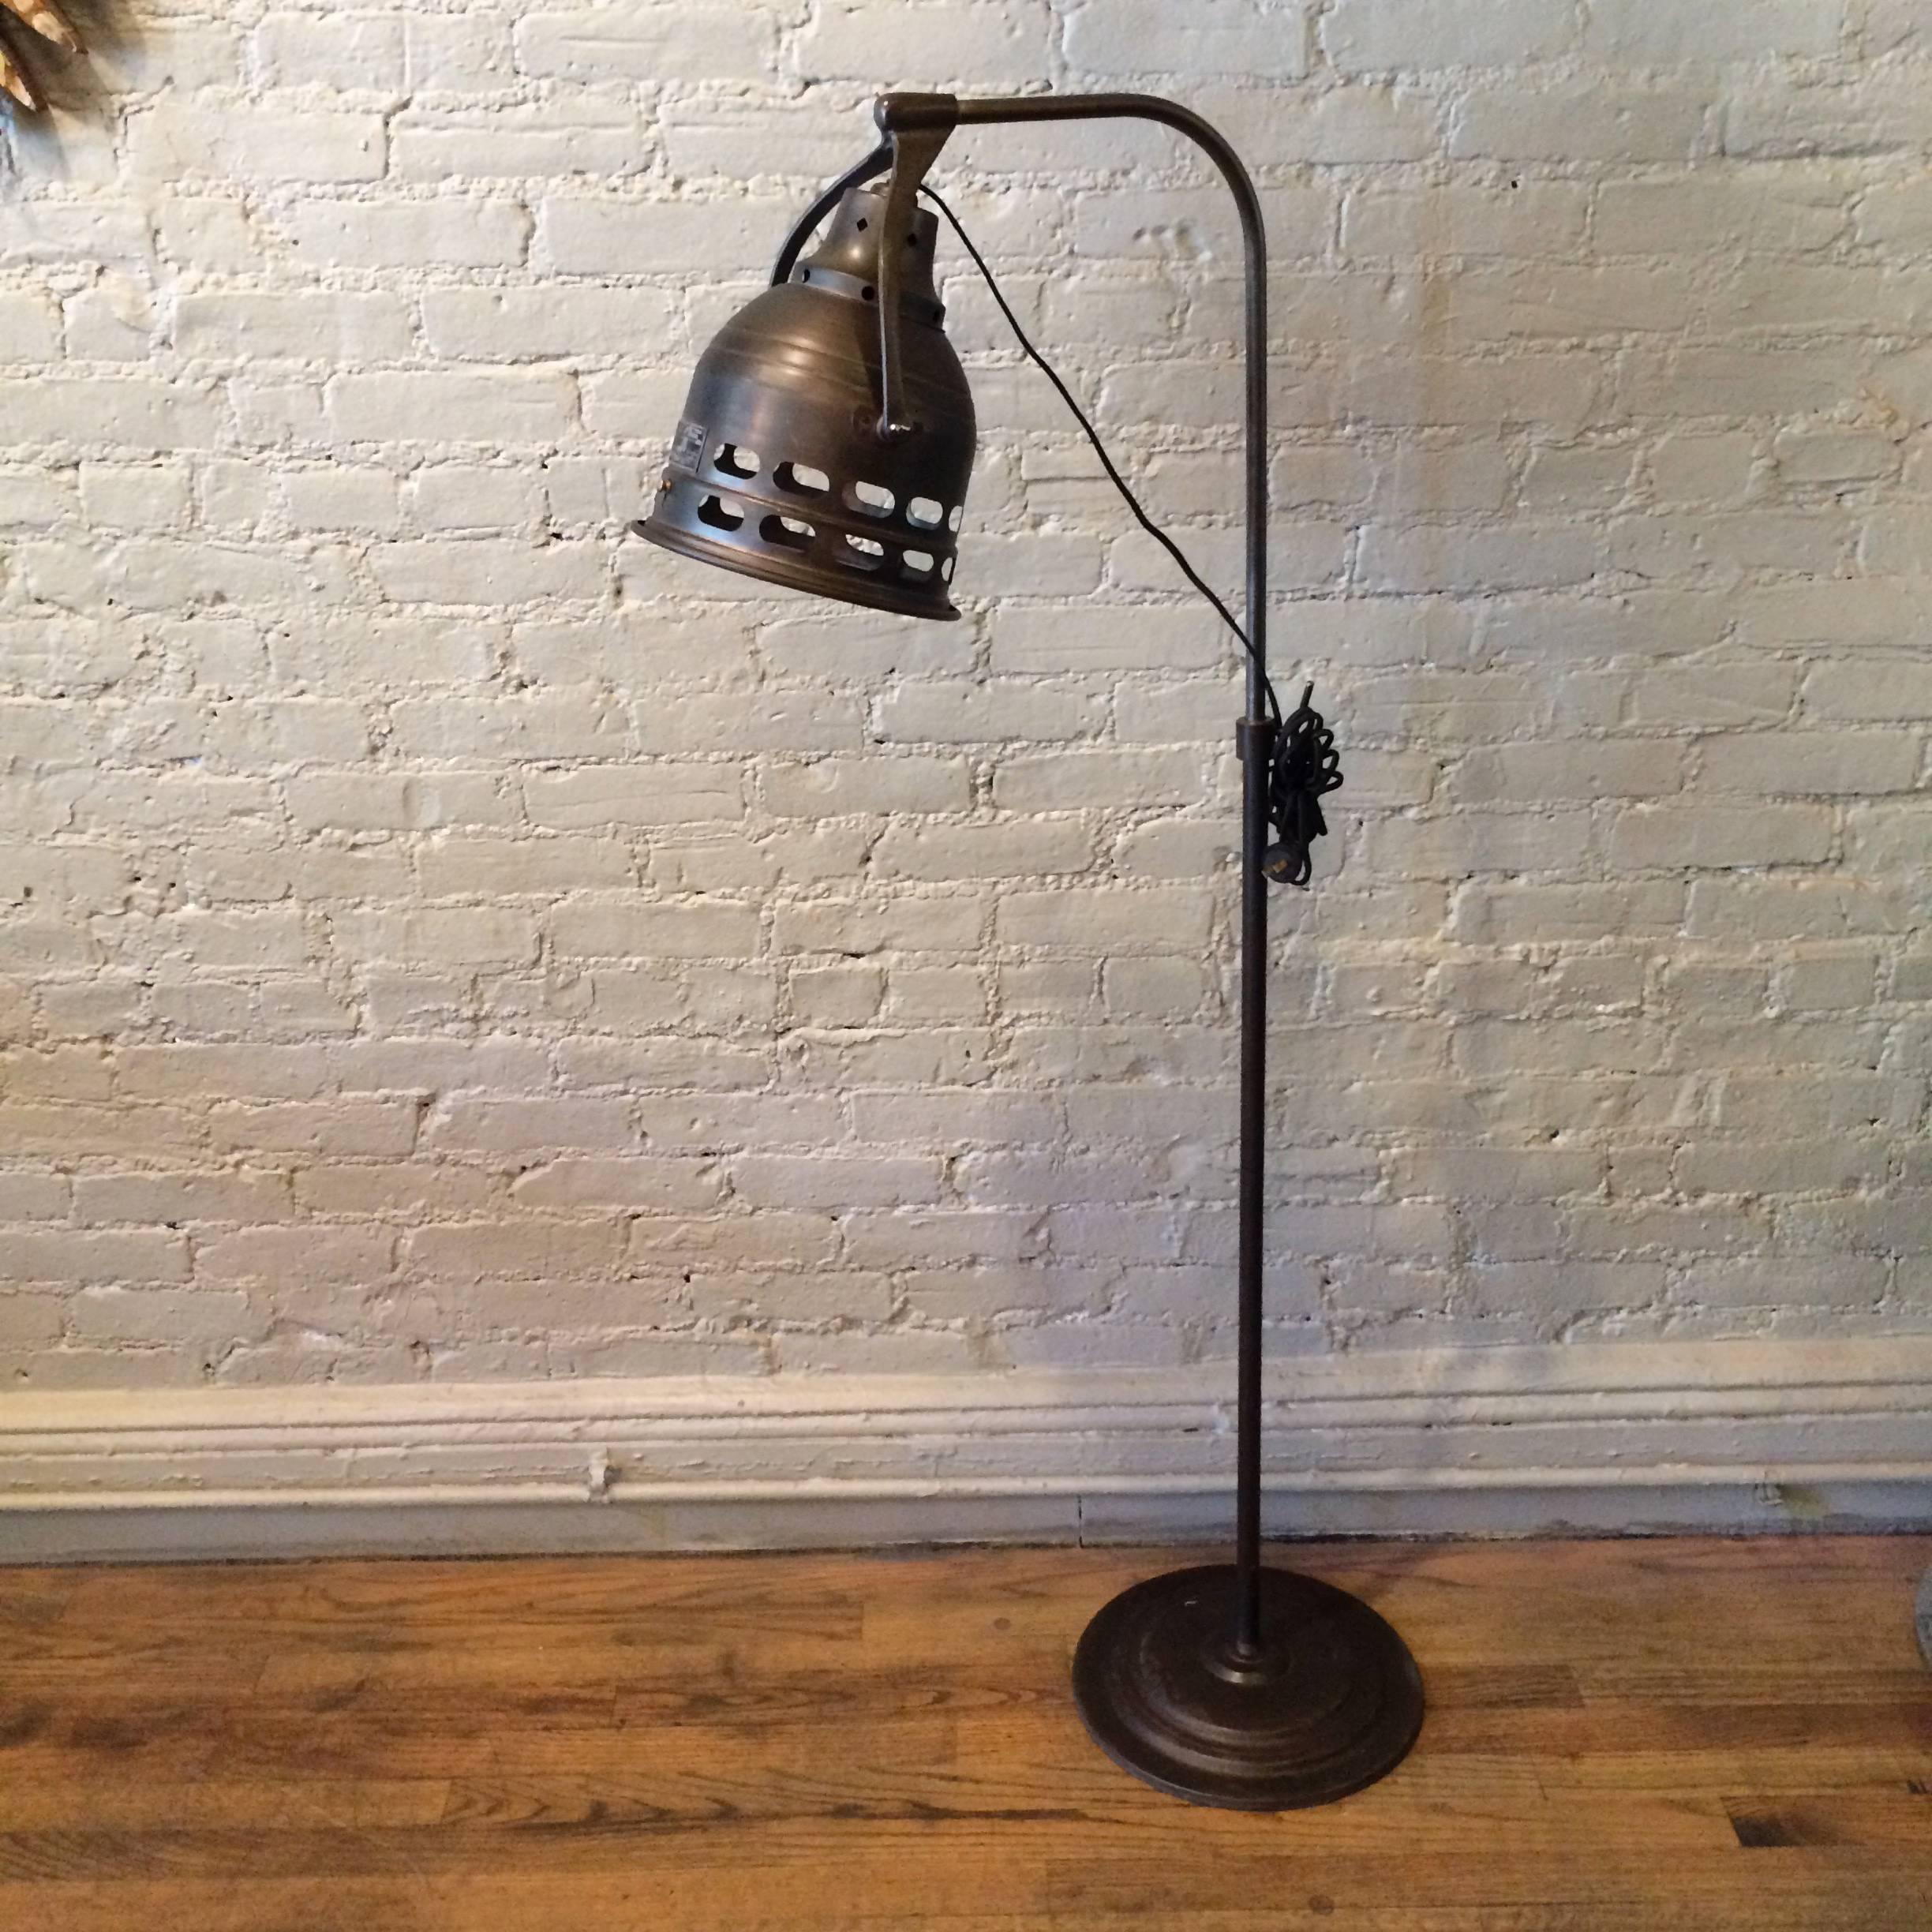 Vintage, 1920s, steel, adjustable height, medical floor lamp in a gunmetal finish features a weighted base and articulating head with Fresnel glass lens insert. Lamp takes a regular bulb up to 200 watts.